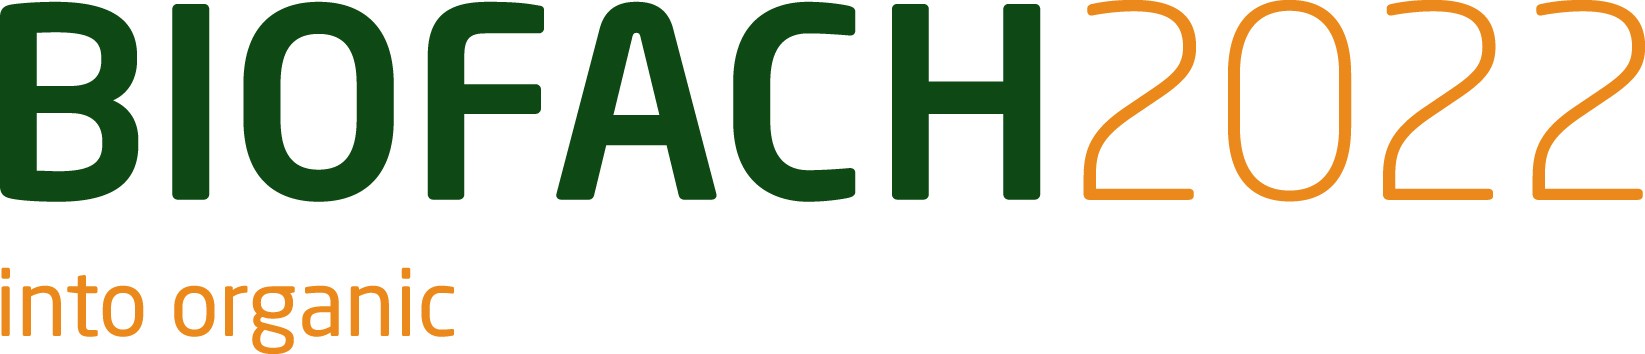 BIOFACH-2022-Logo-without-date-coloured-positive-300dpi-RGB